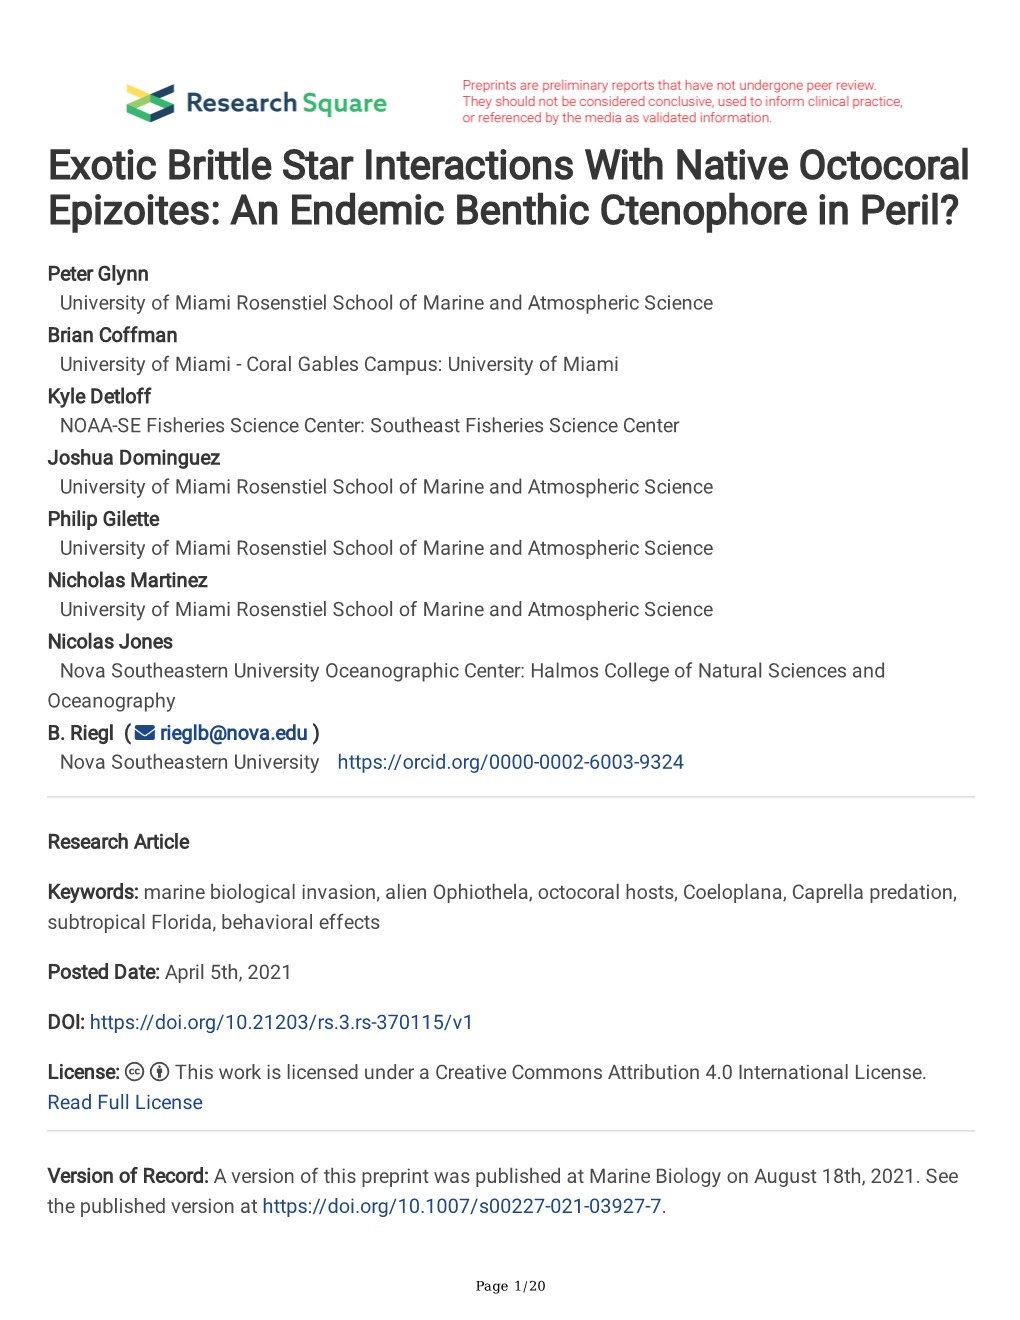 Exotic Brittle Star Interactions with Native Octocoral Epizoites: an Endemic Benthic Ctenophore in Peril?